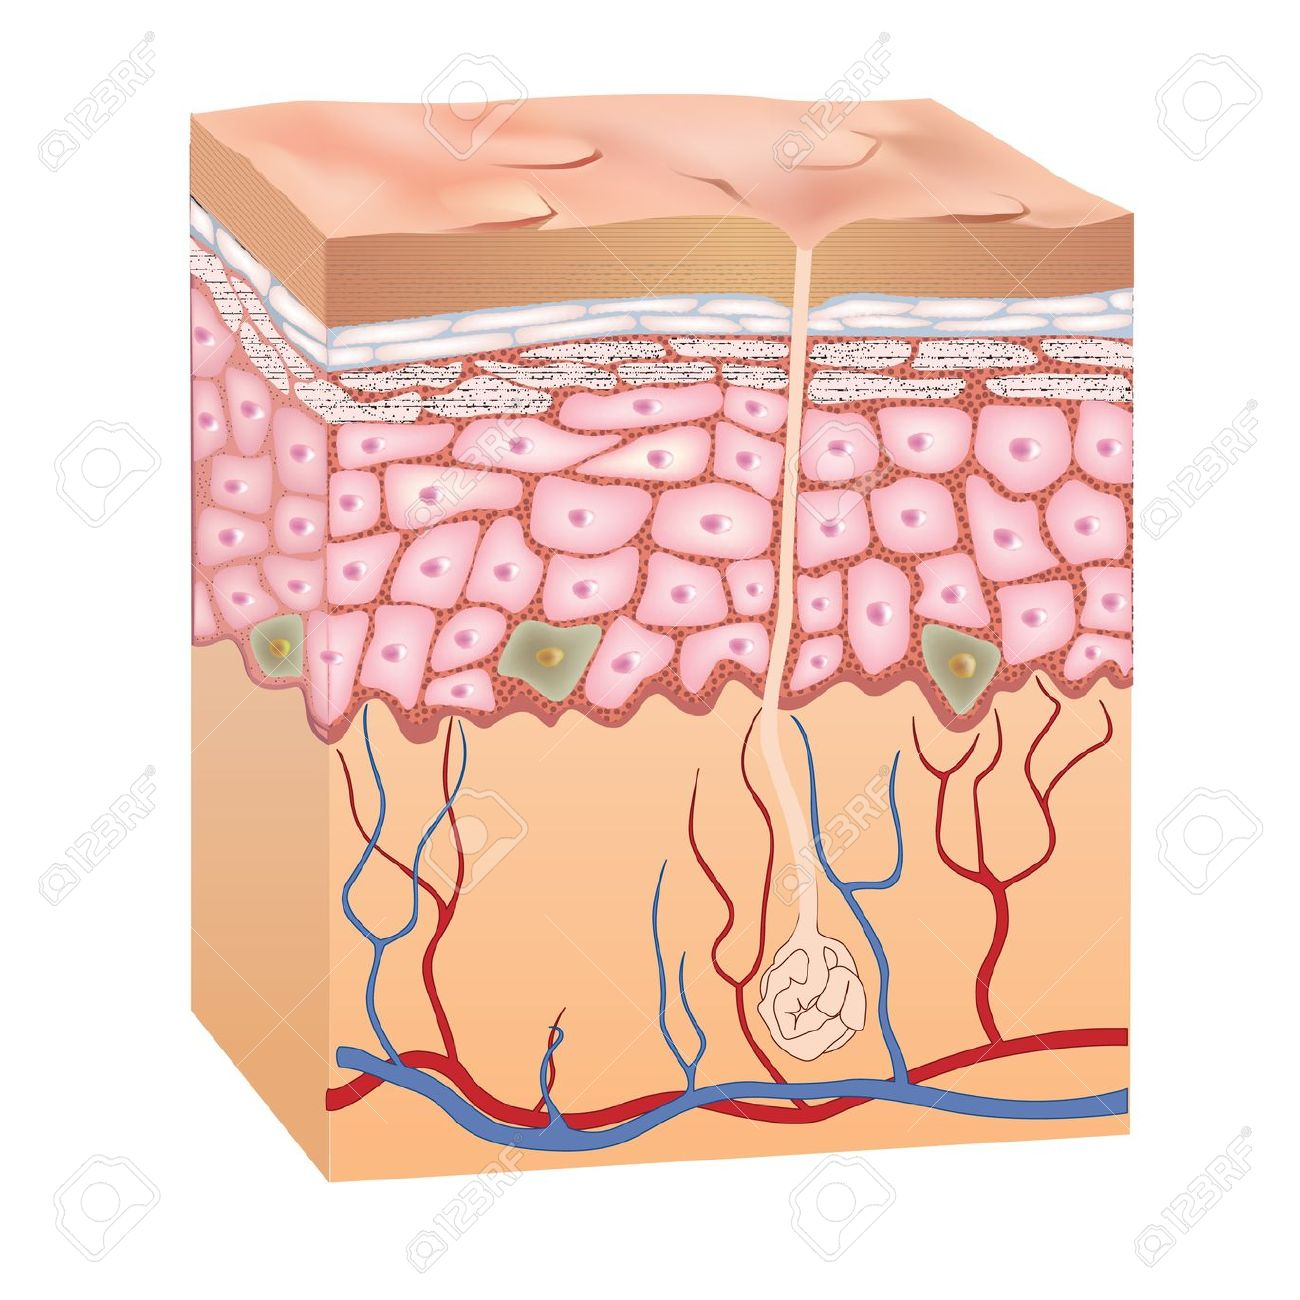 Skin clipart skin tissue. Humane structure layers human